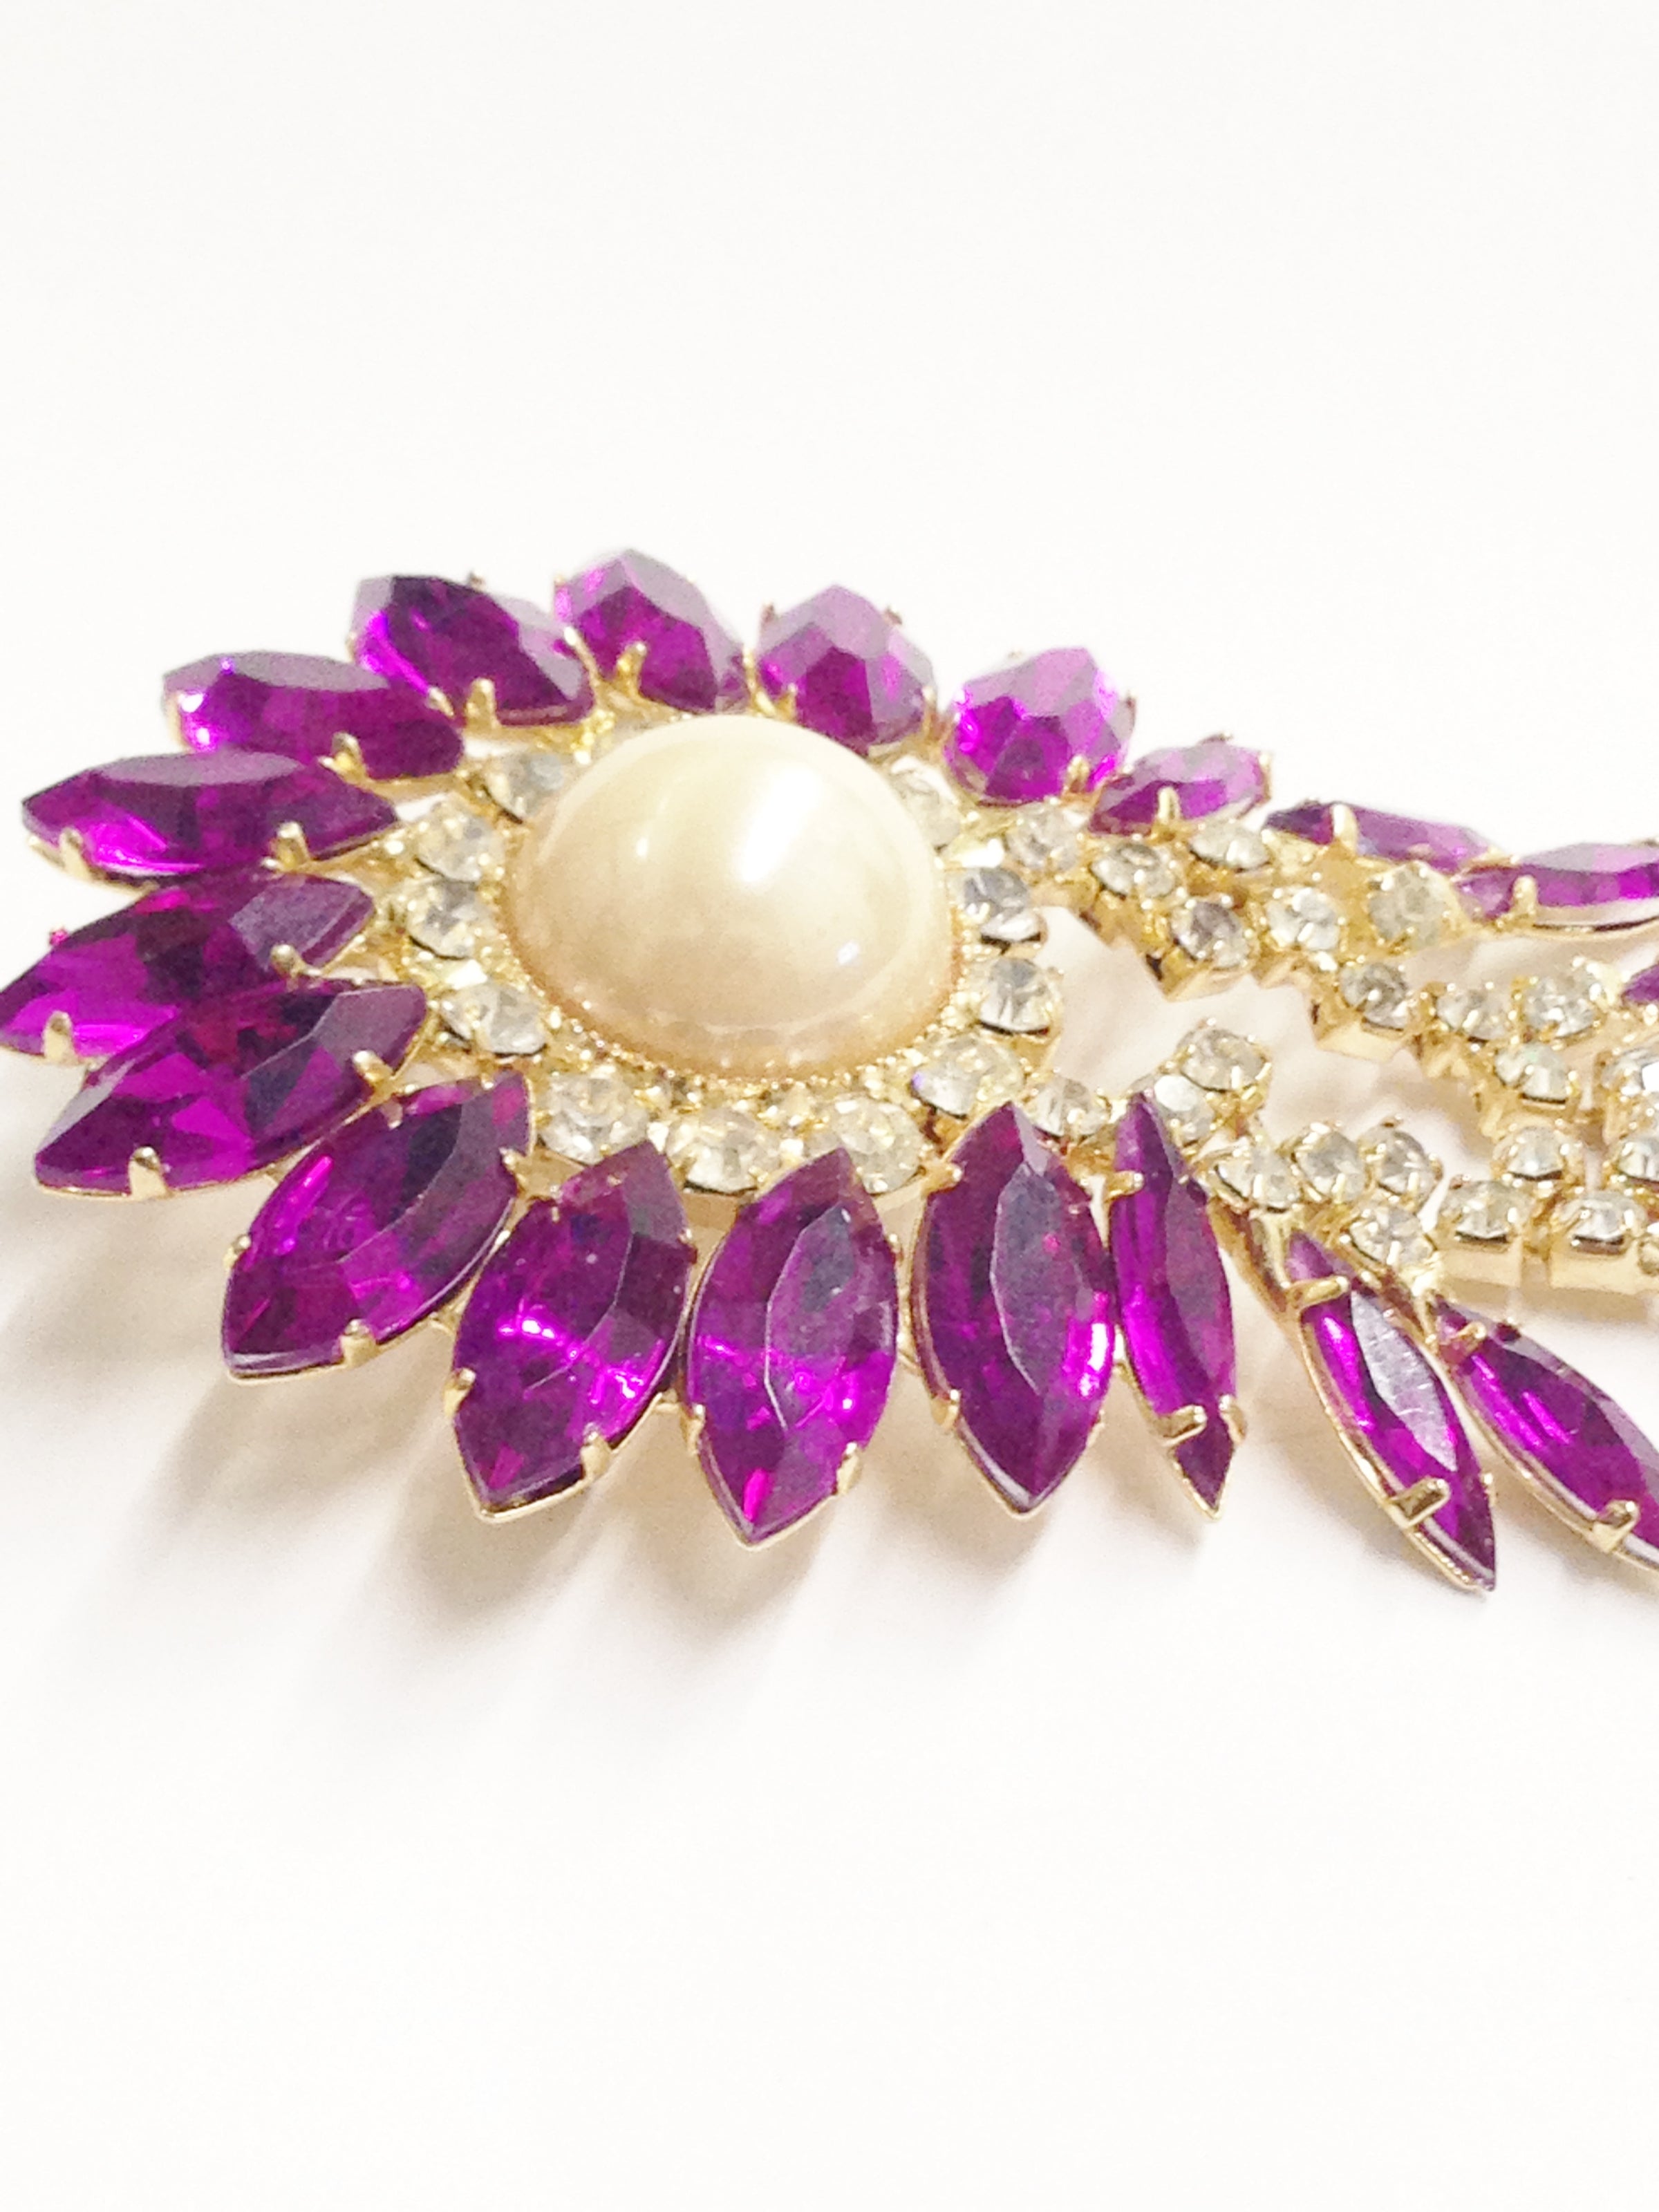 Dangling Purple Rhinestone Brooch Pin With Clear Rhinestones and Faux Pearl Center